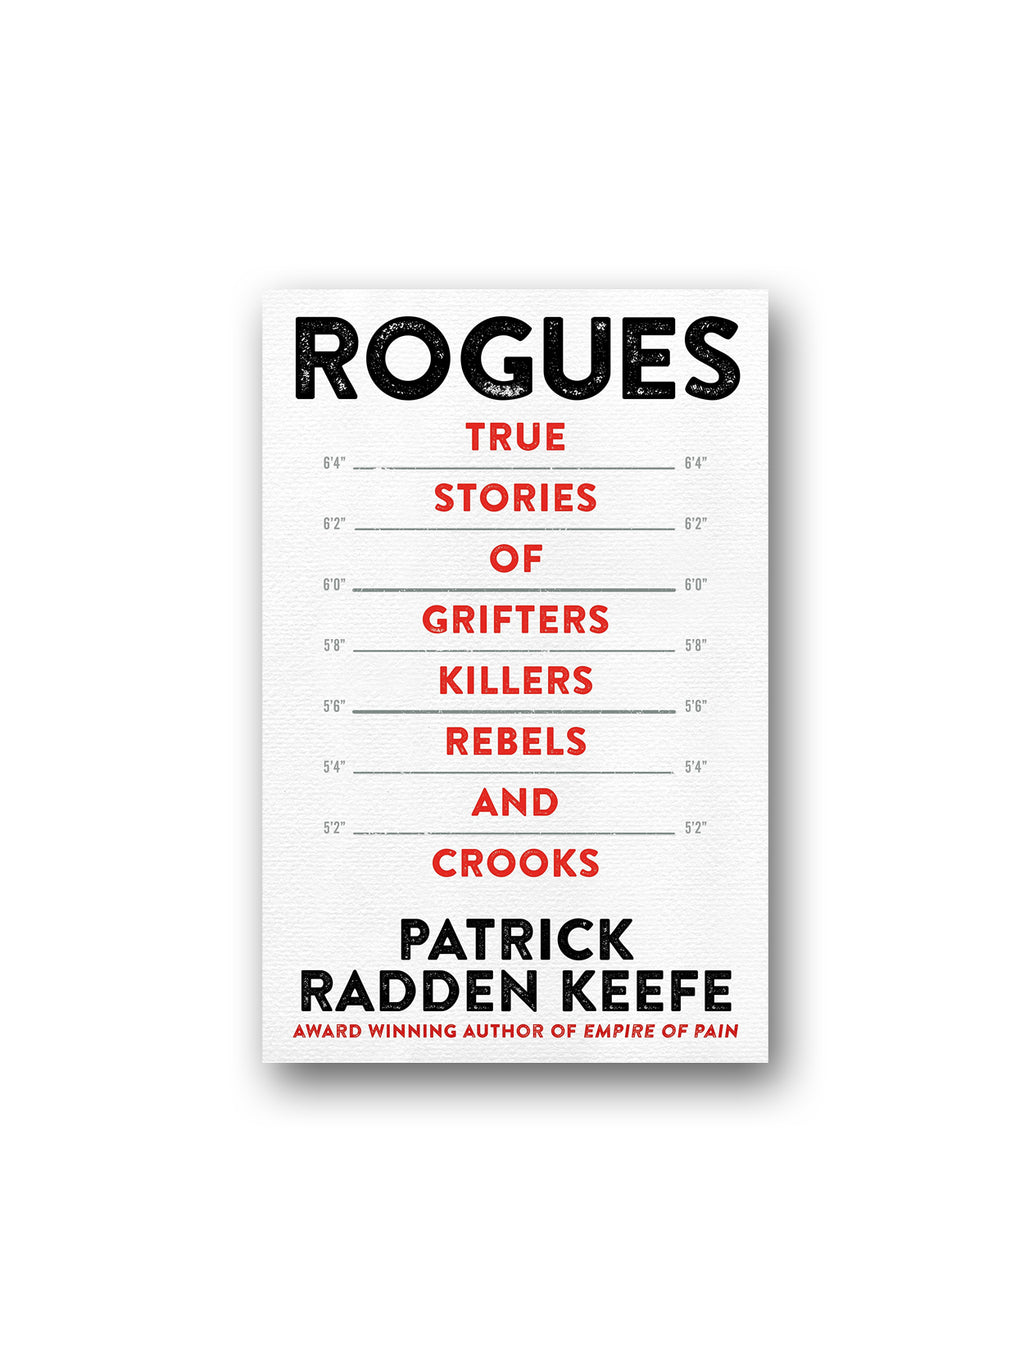 Rogues : True Stories of Grifters, Killers, Rebels and Crooks